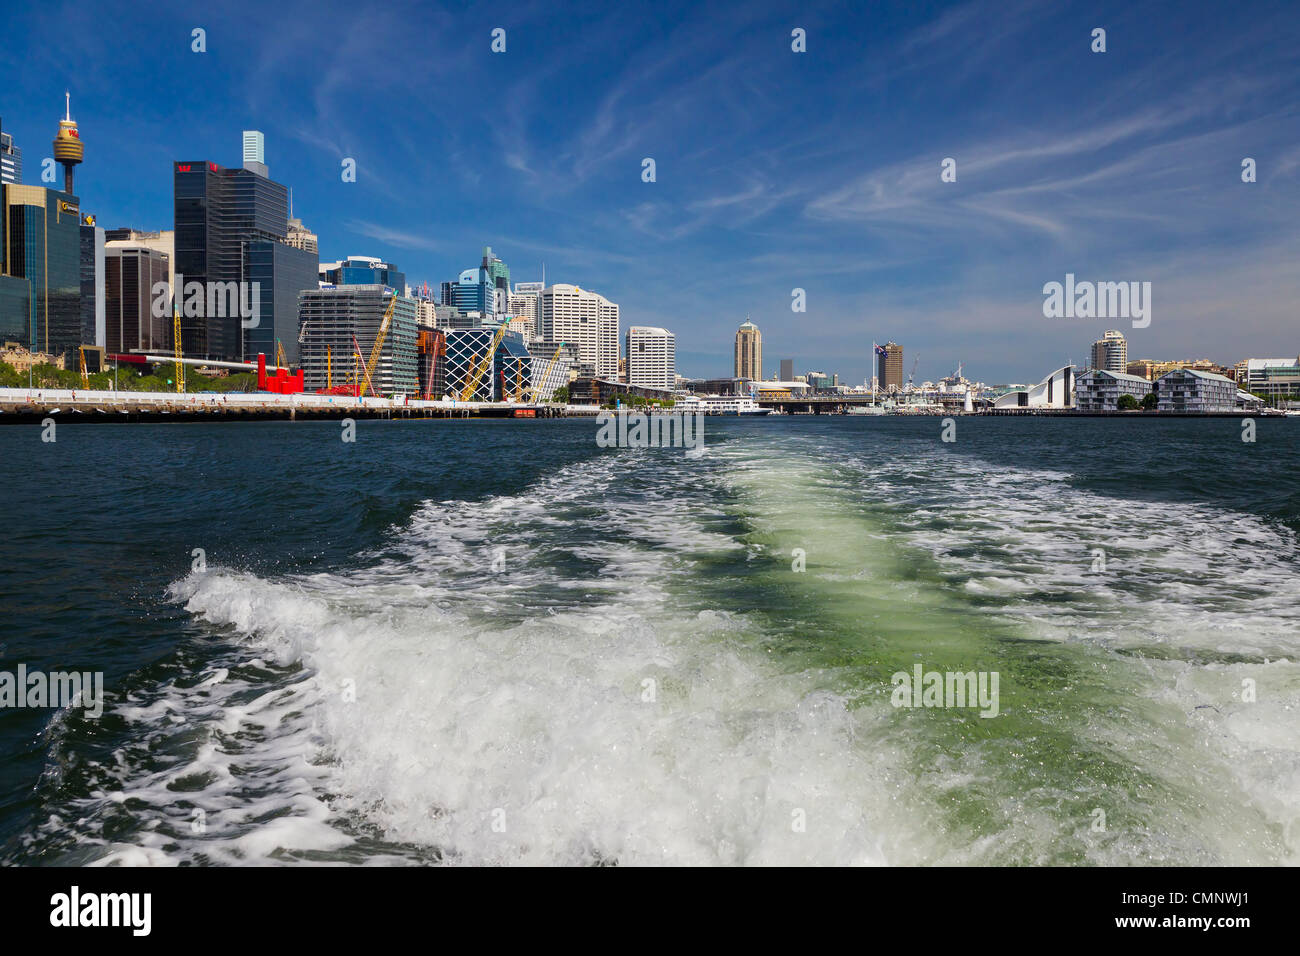 View from Water of Darling Harbour Sydney Stock Photo